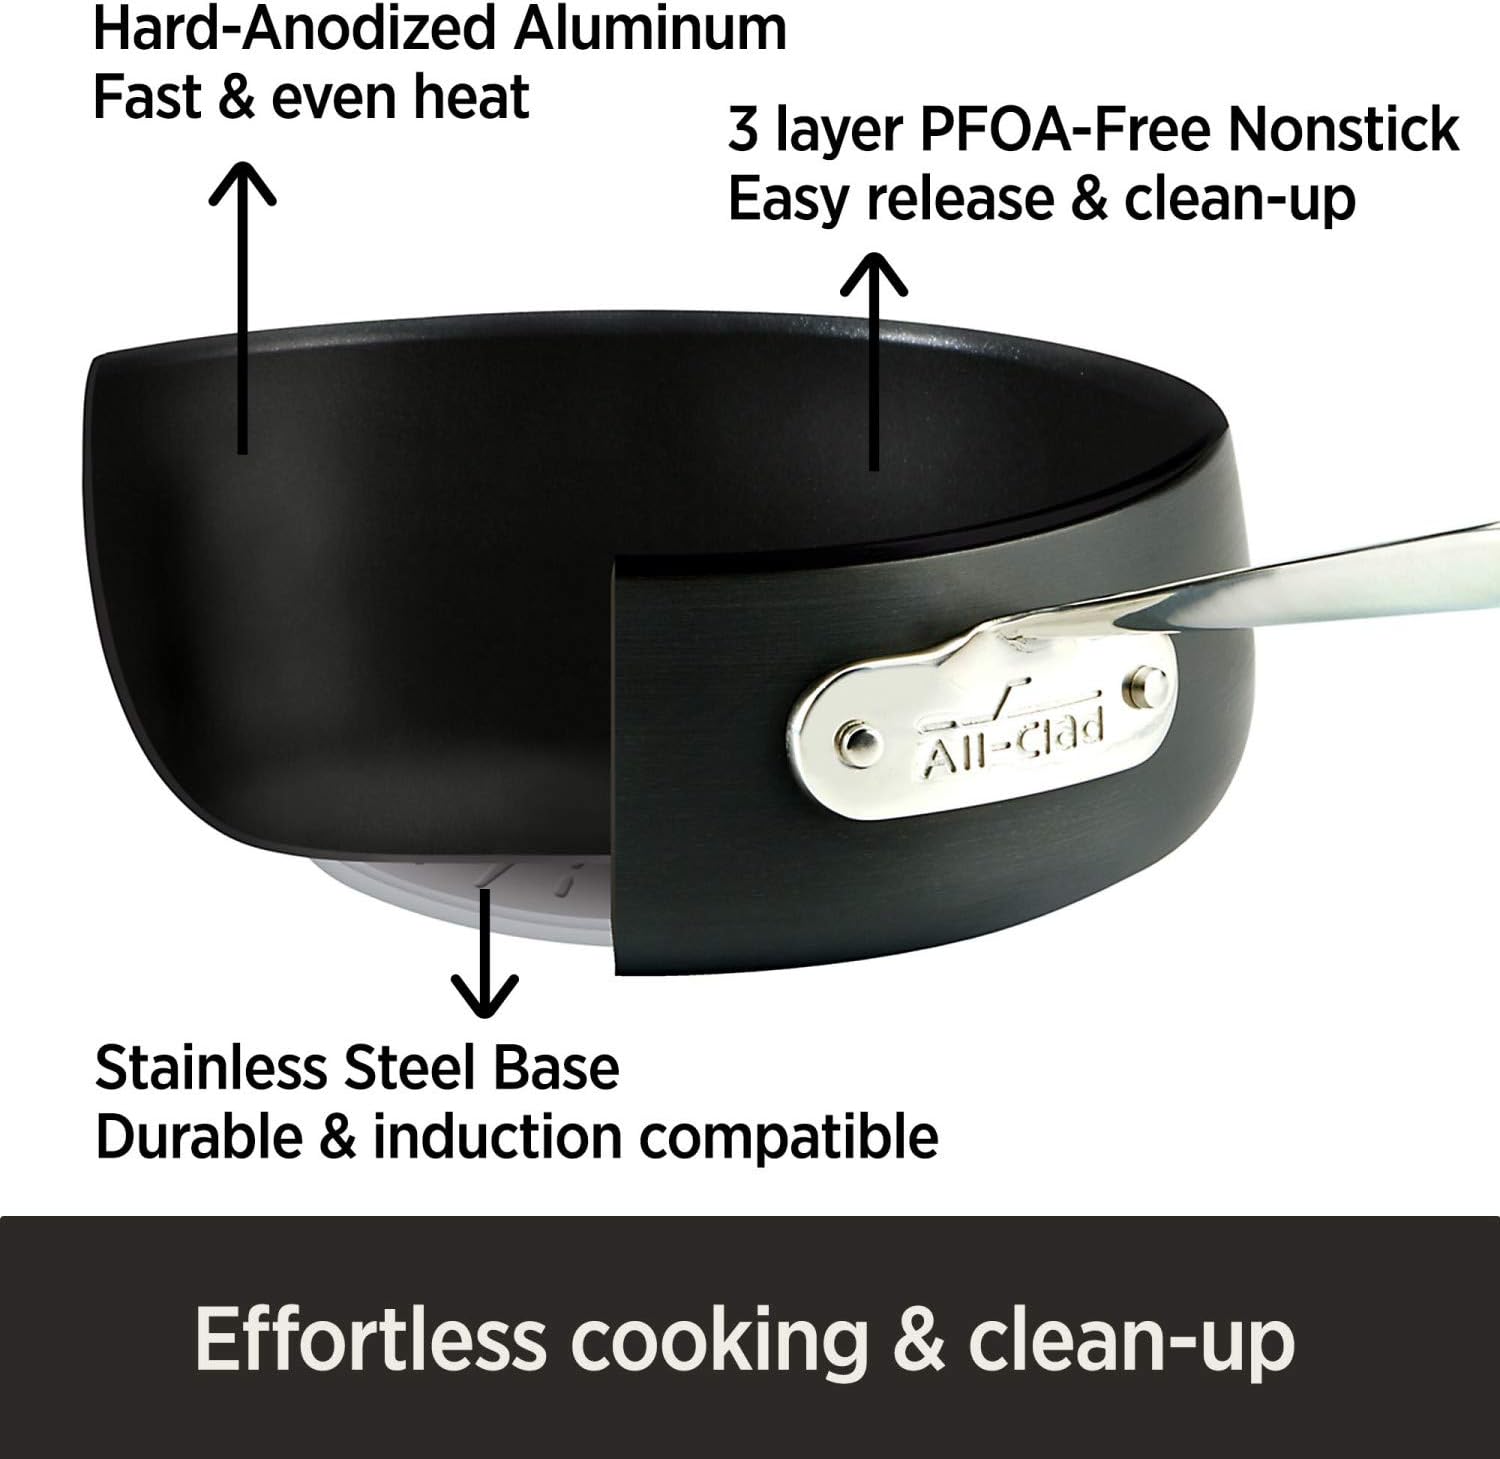 All-Clad HA1 Hard Anodized Nonstick Chef's Pan, Wok 12 Inch Induction Oven Broiler Safe 500F, Lid Safe 350F Pots and Pans, Cookware Black